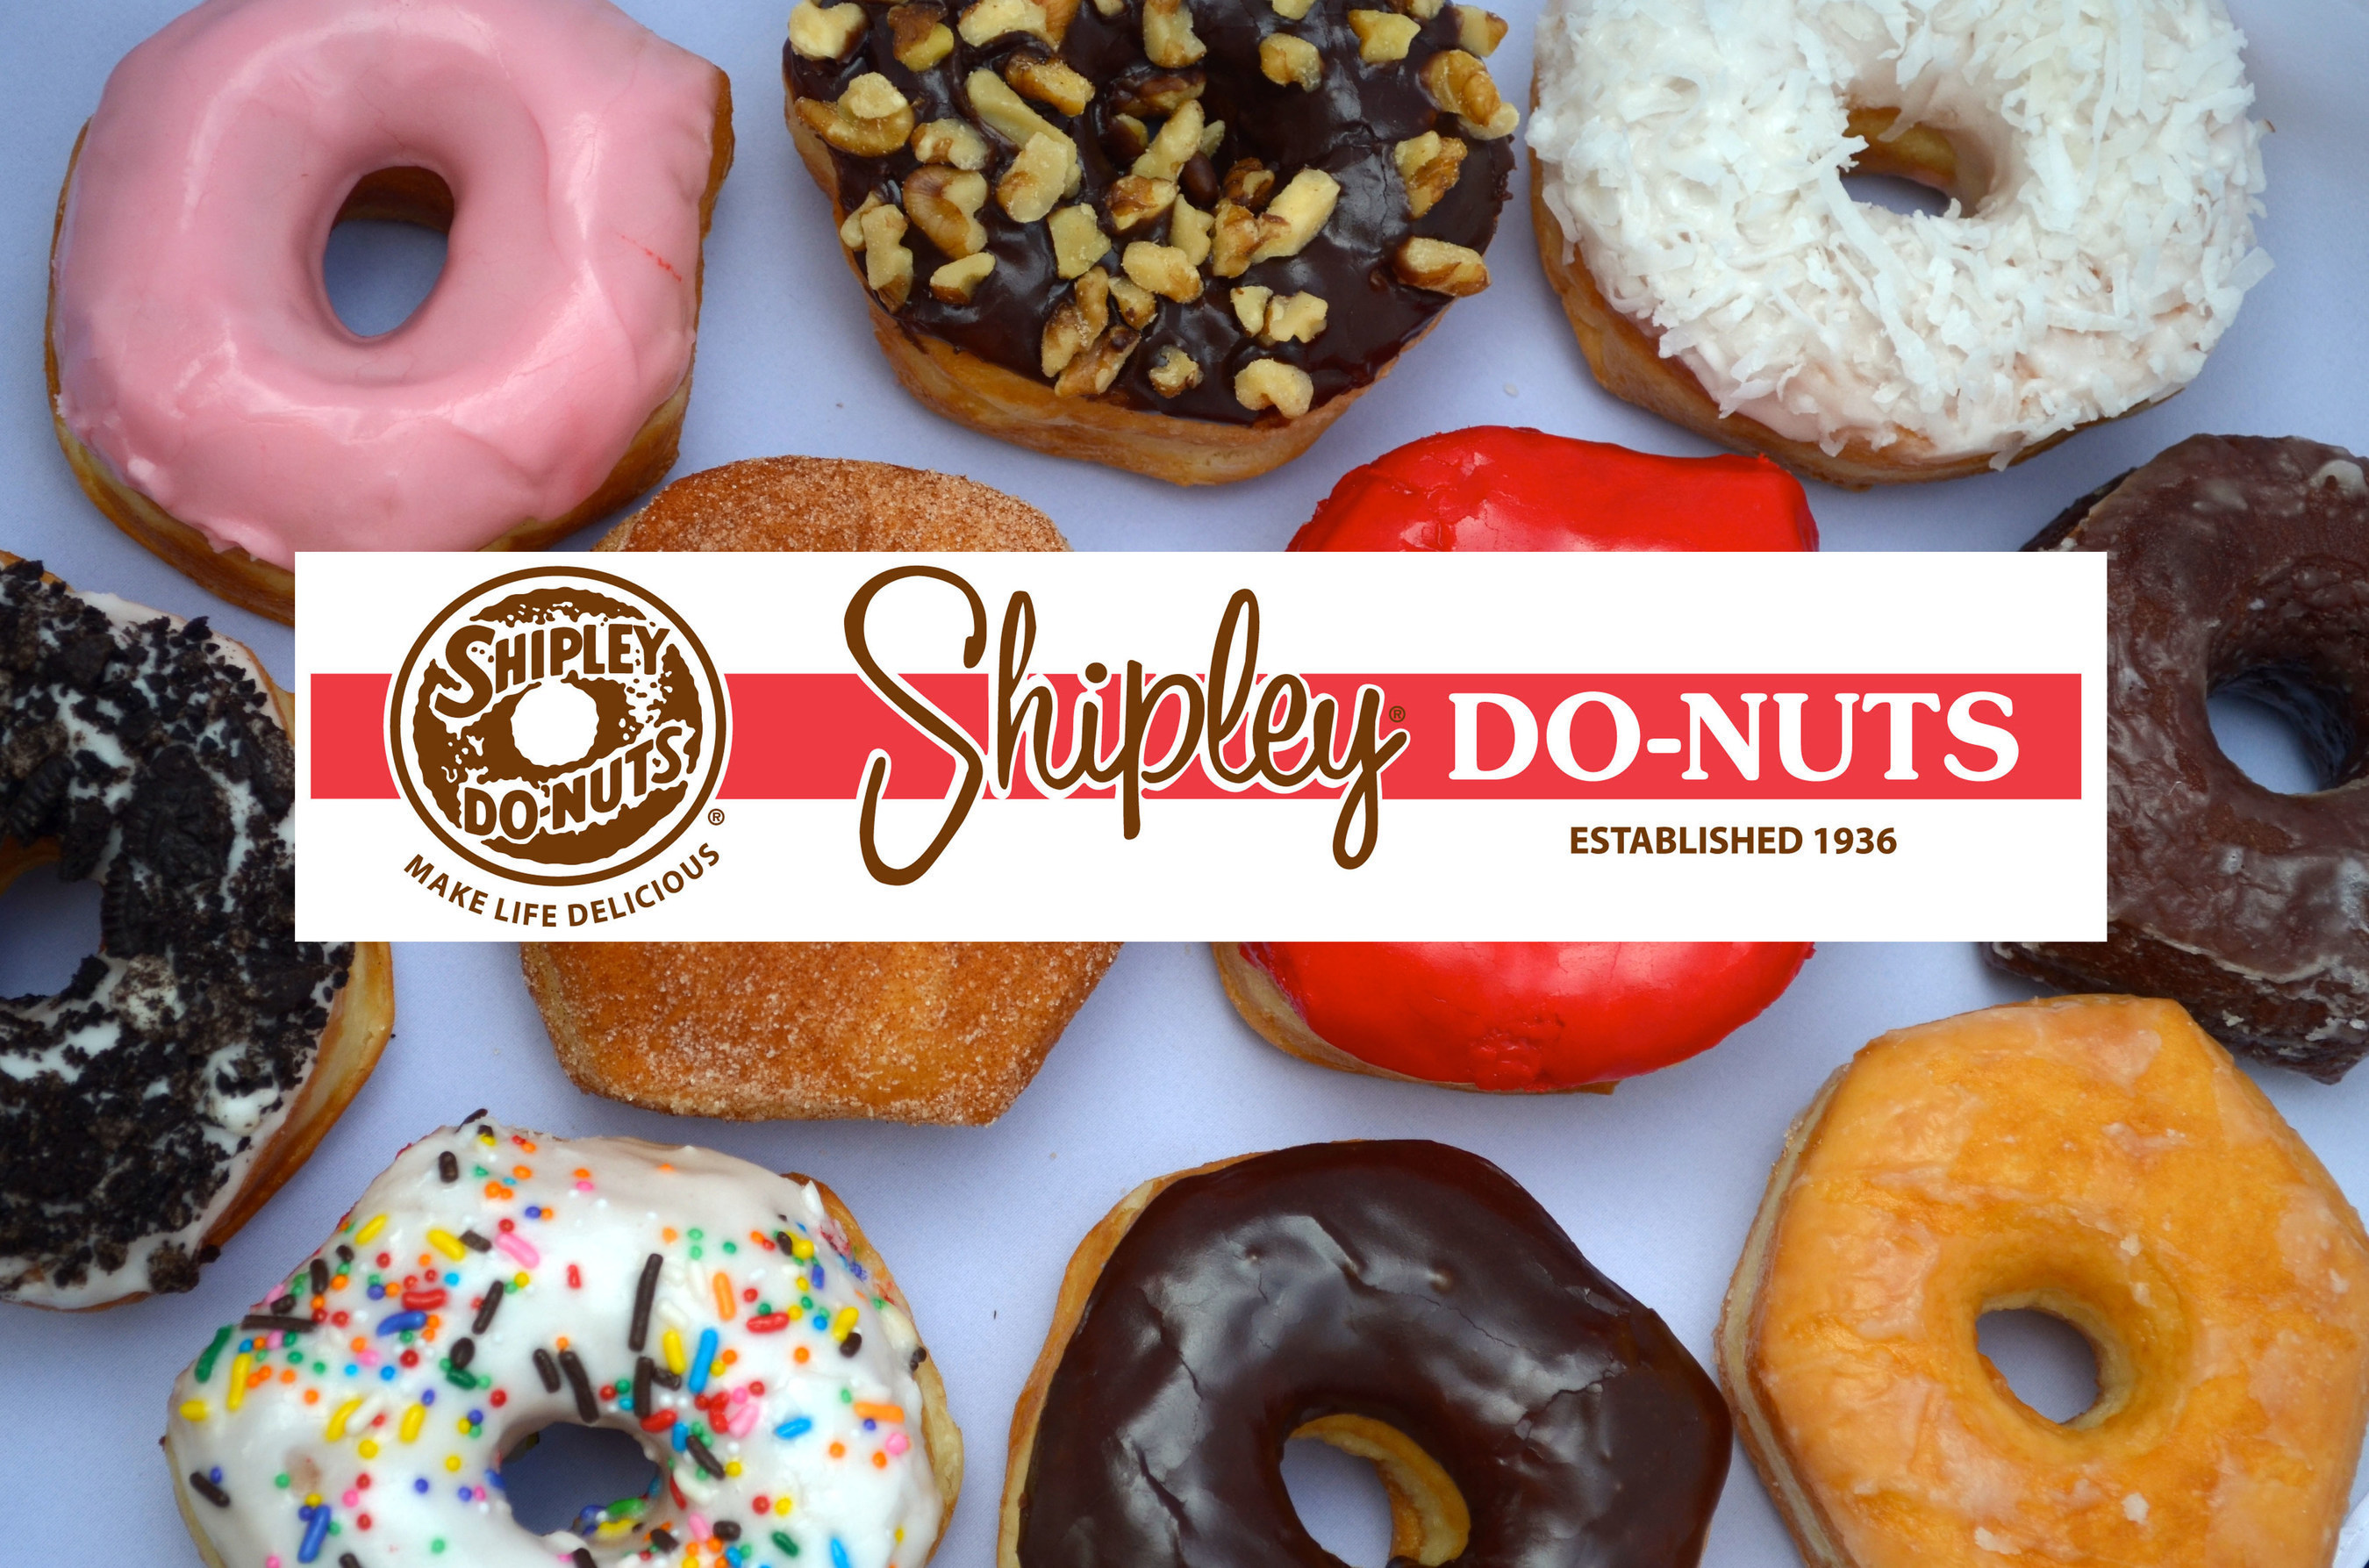 Shipley Do-Nuts -- Making Life Delicious since 1936 with over 250 locations in the US